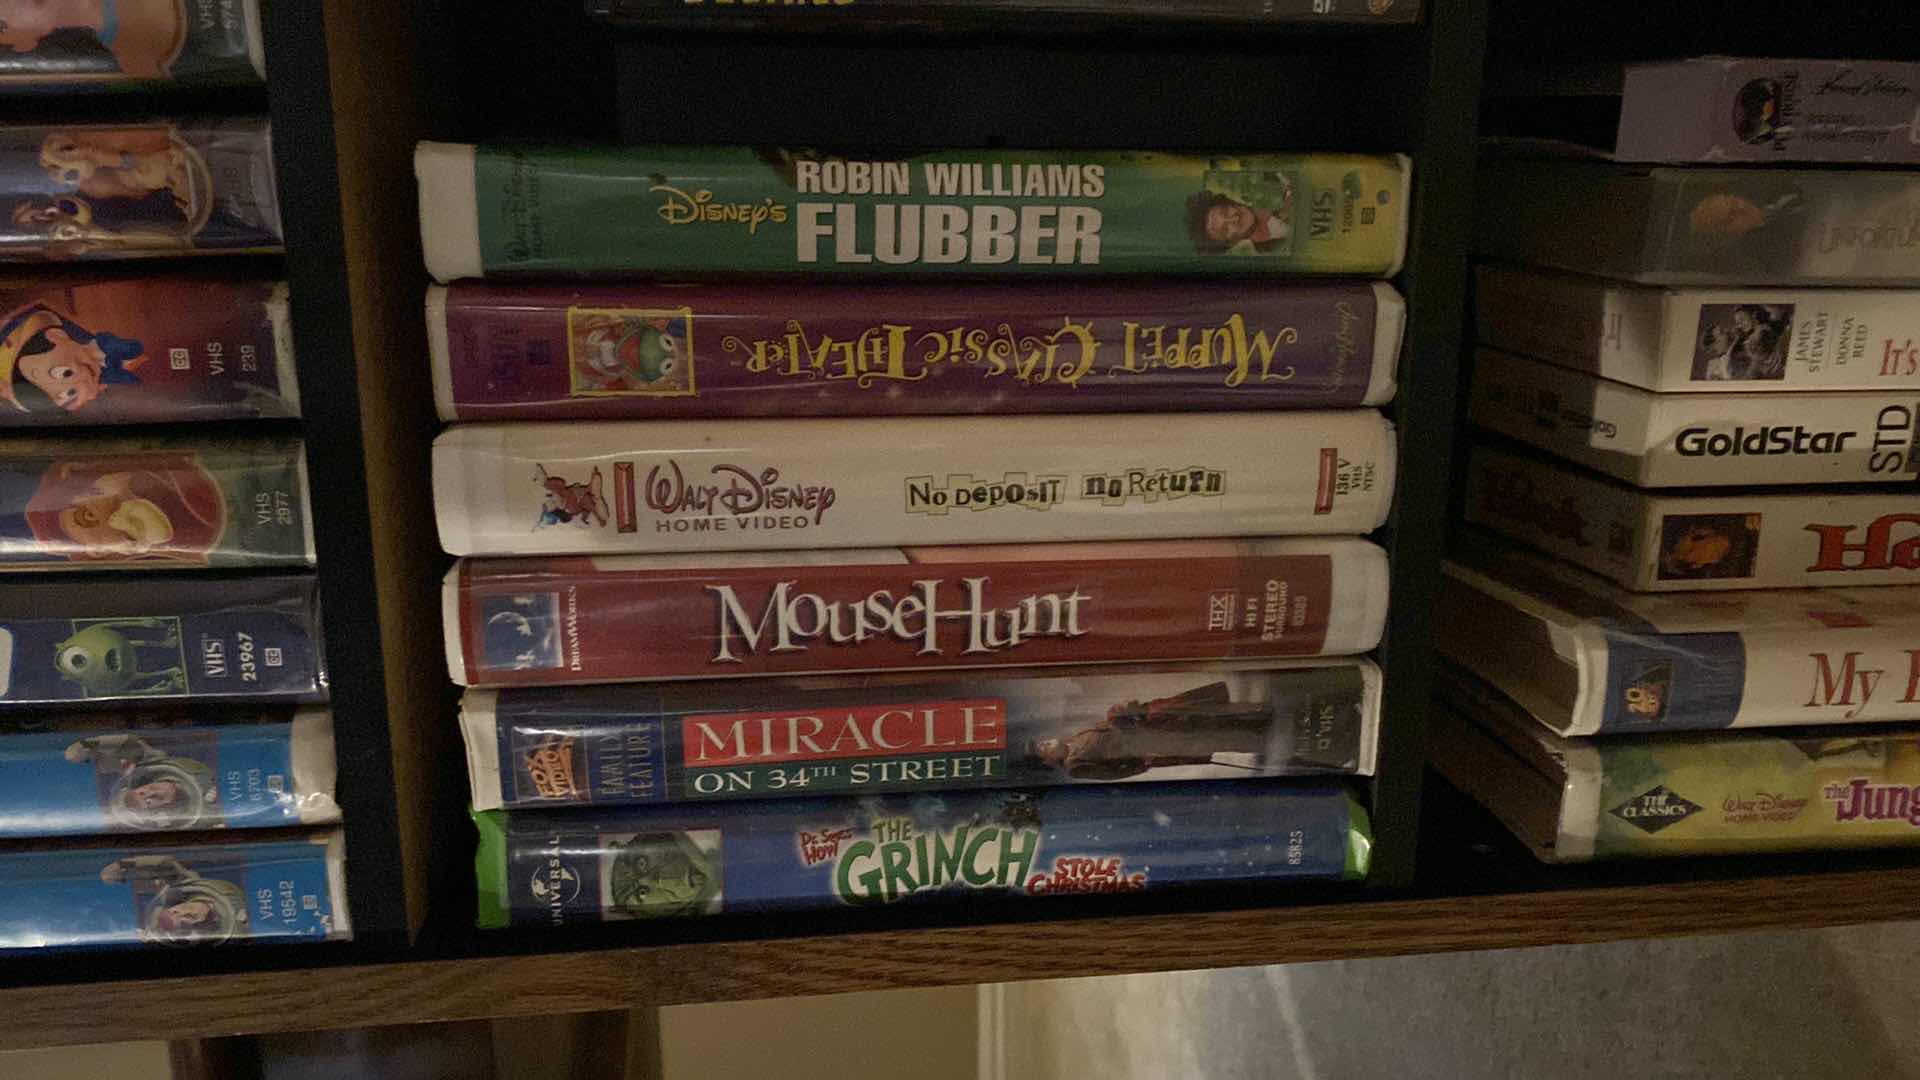 Photo 4 of DISNEY VHS COLLECTION INCLUDES HOLDER 11" X 9" H45"